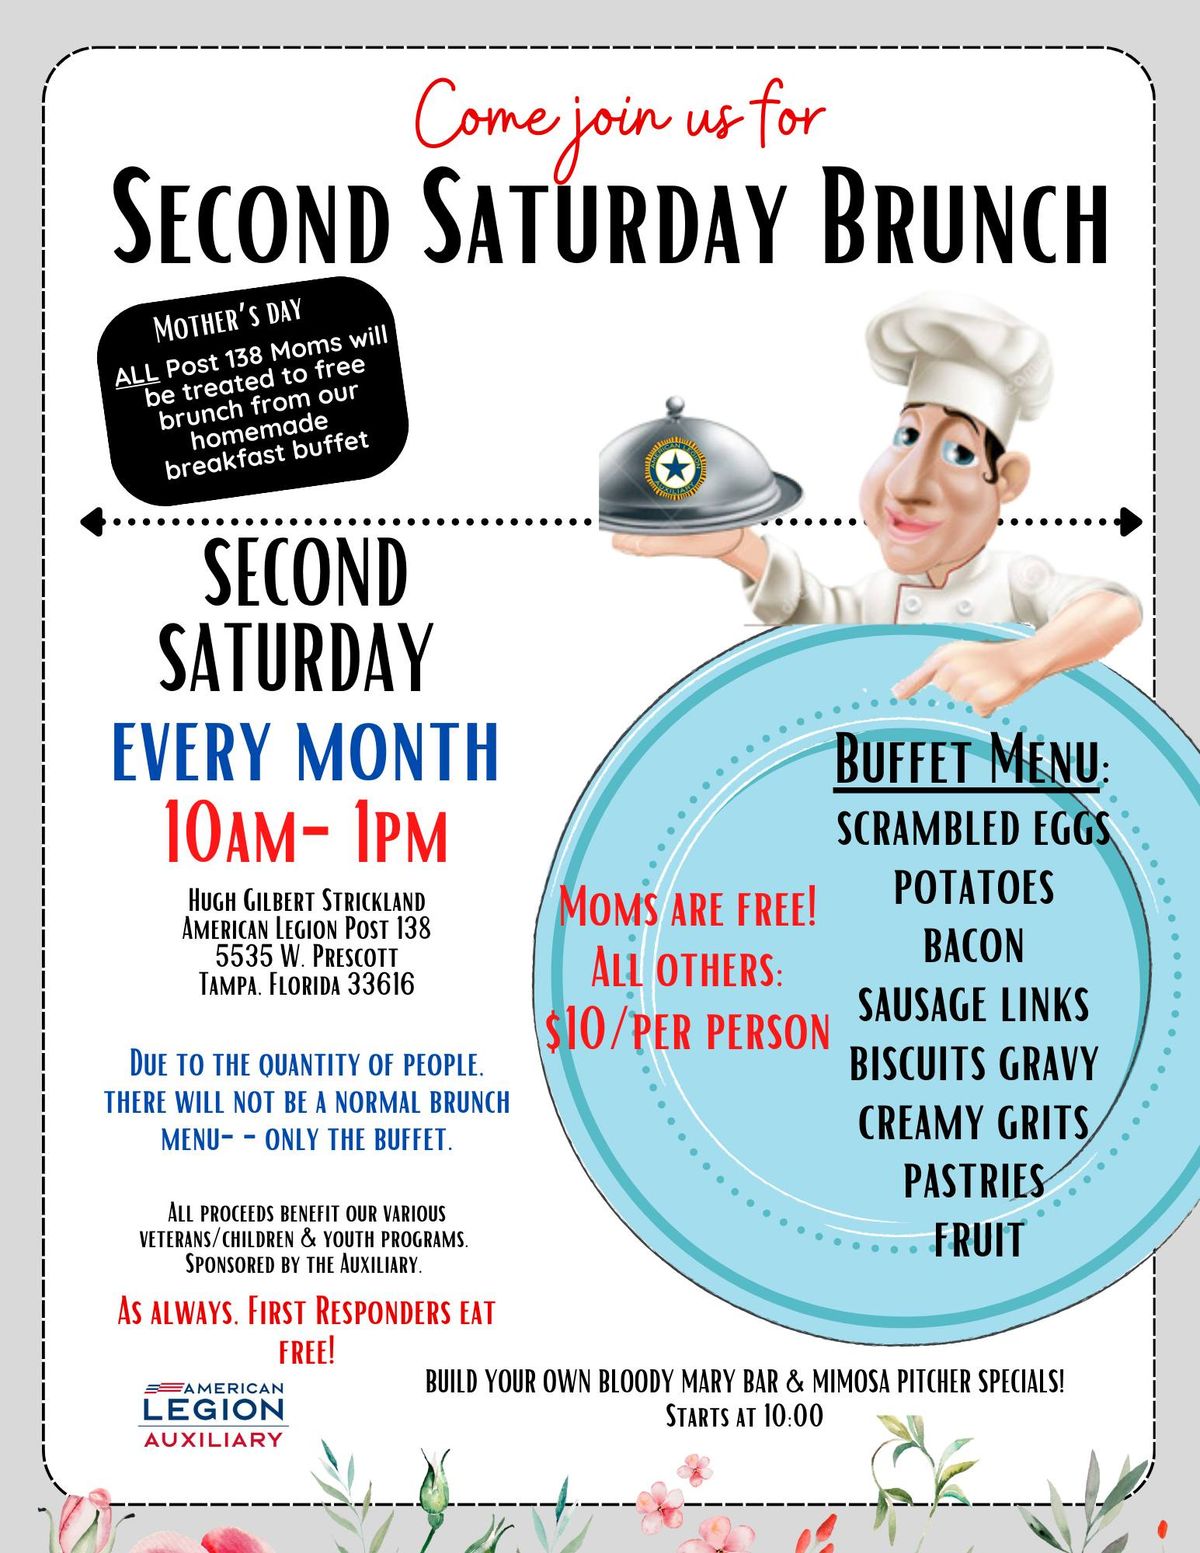 Second Saturday Brunch